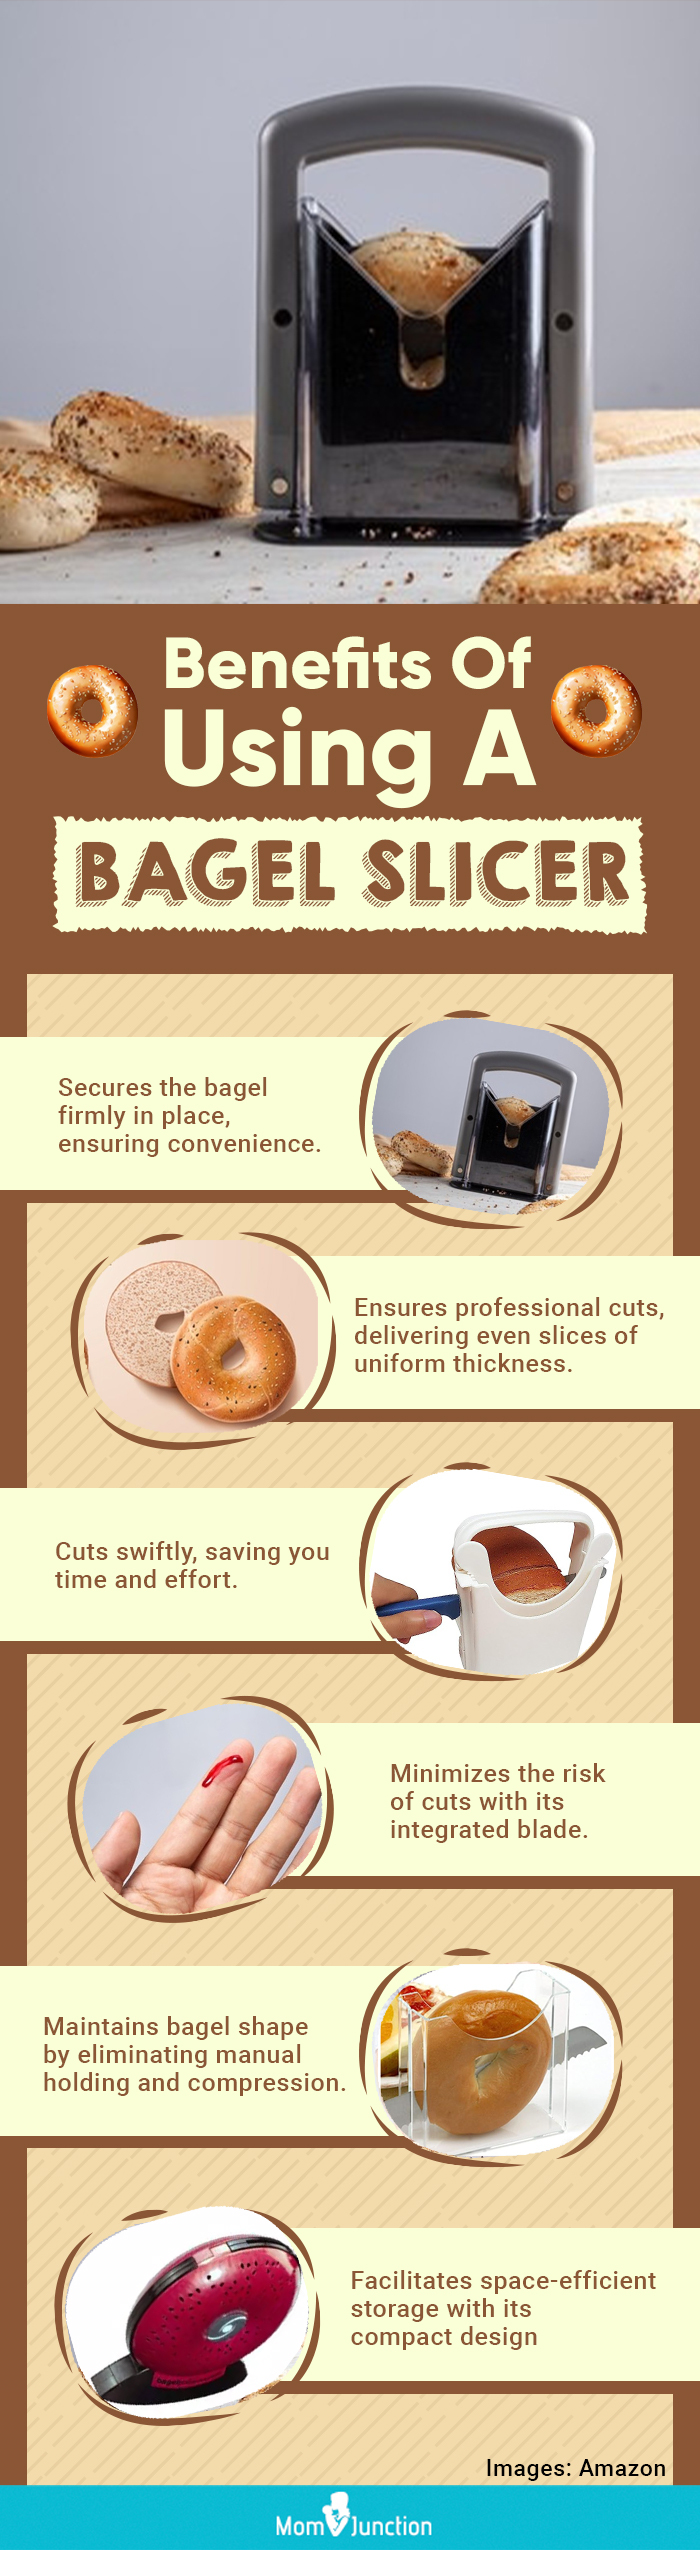 Benefits Of Using A Bagel Slicer (infographic)